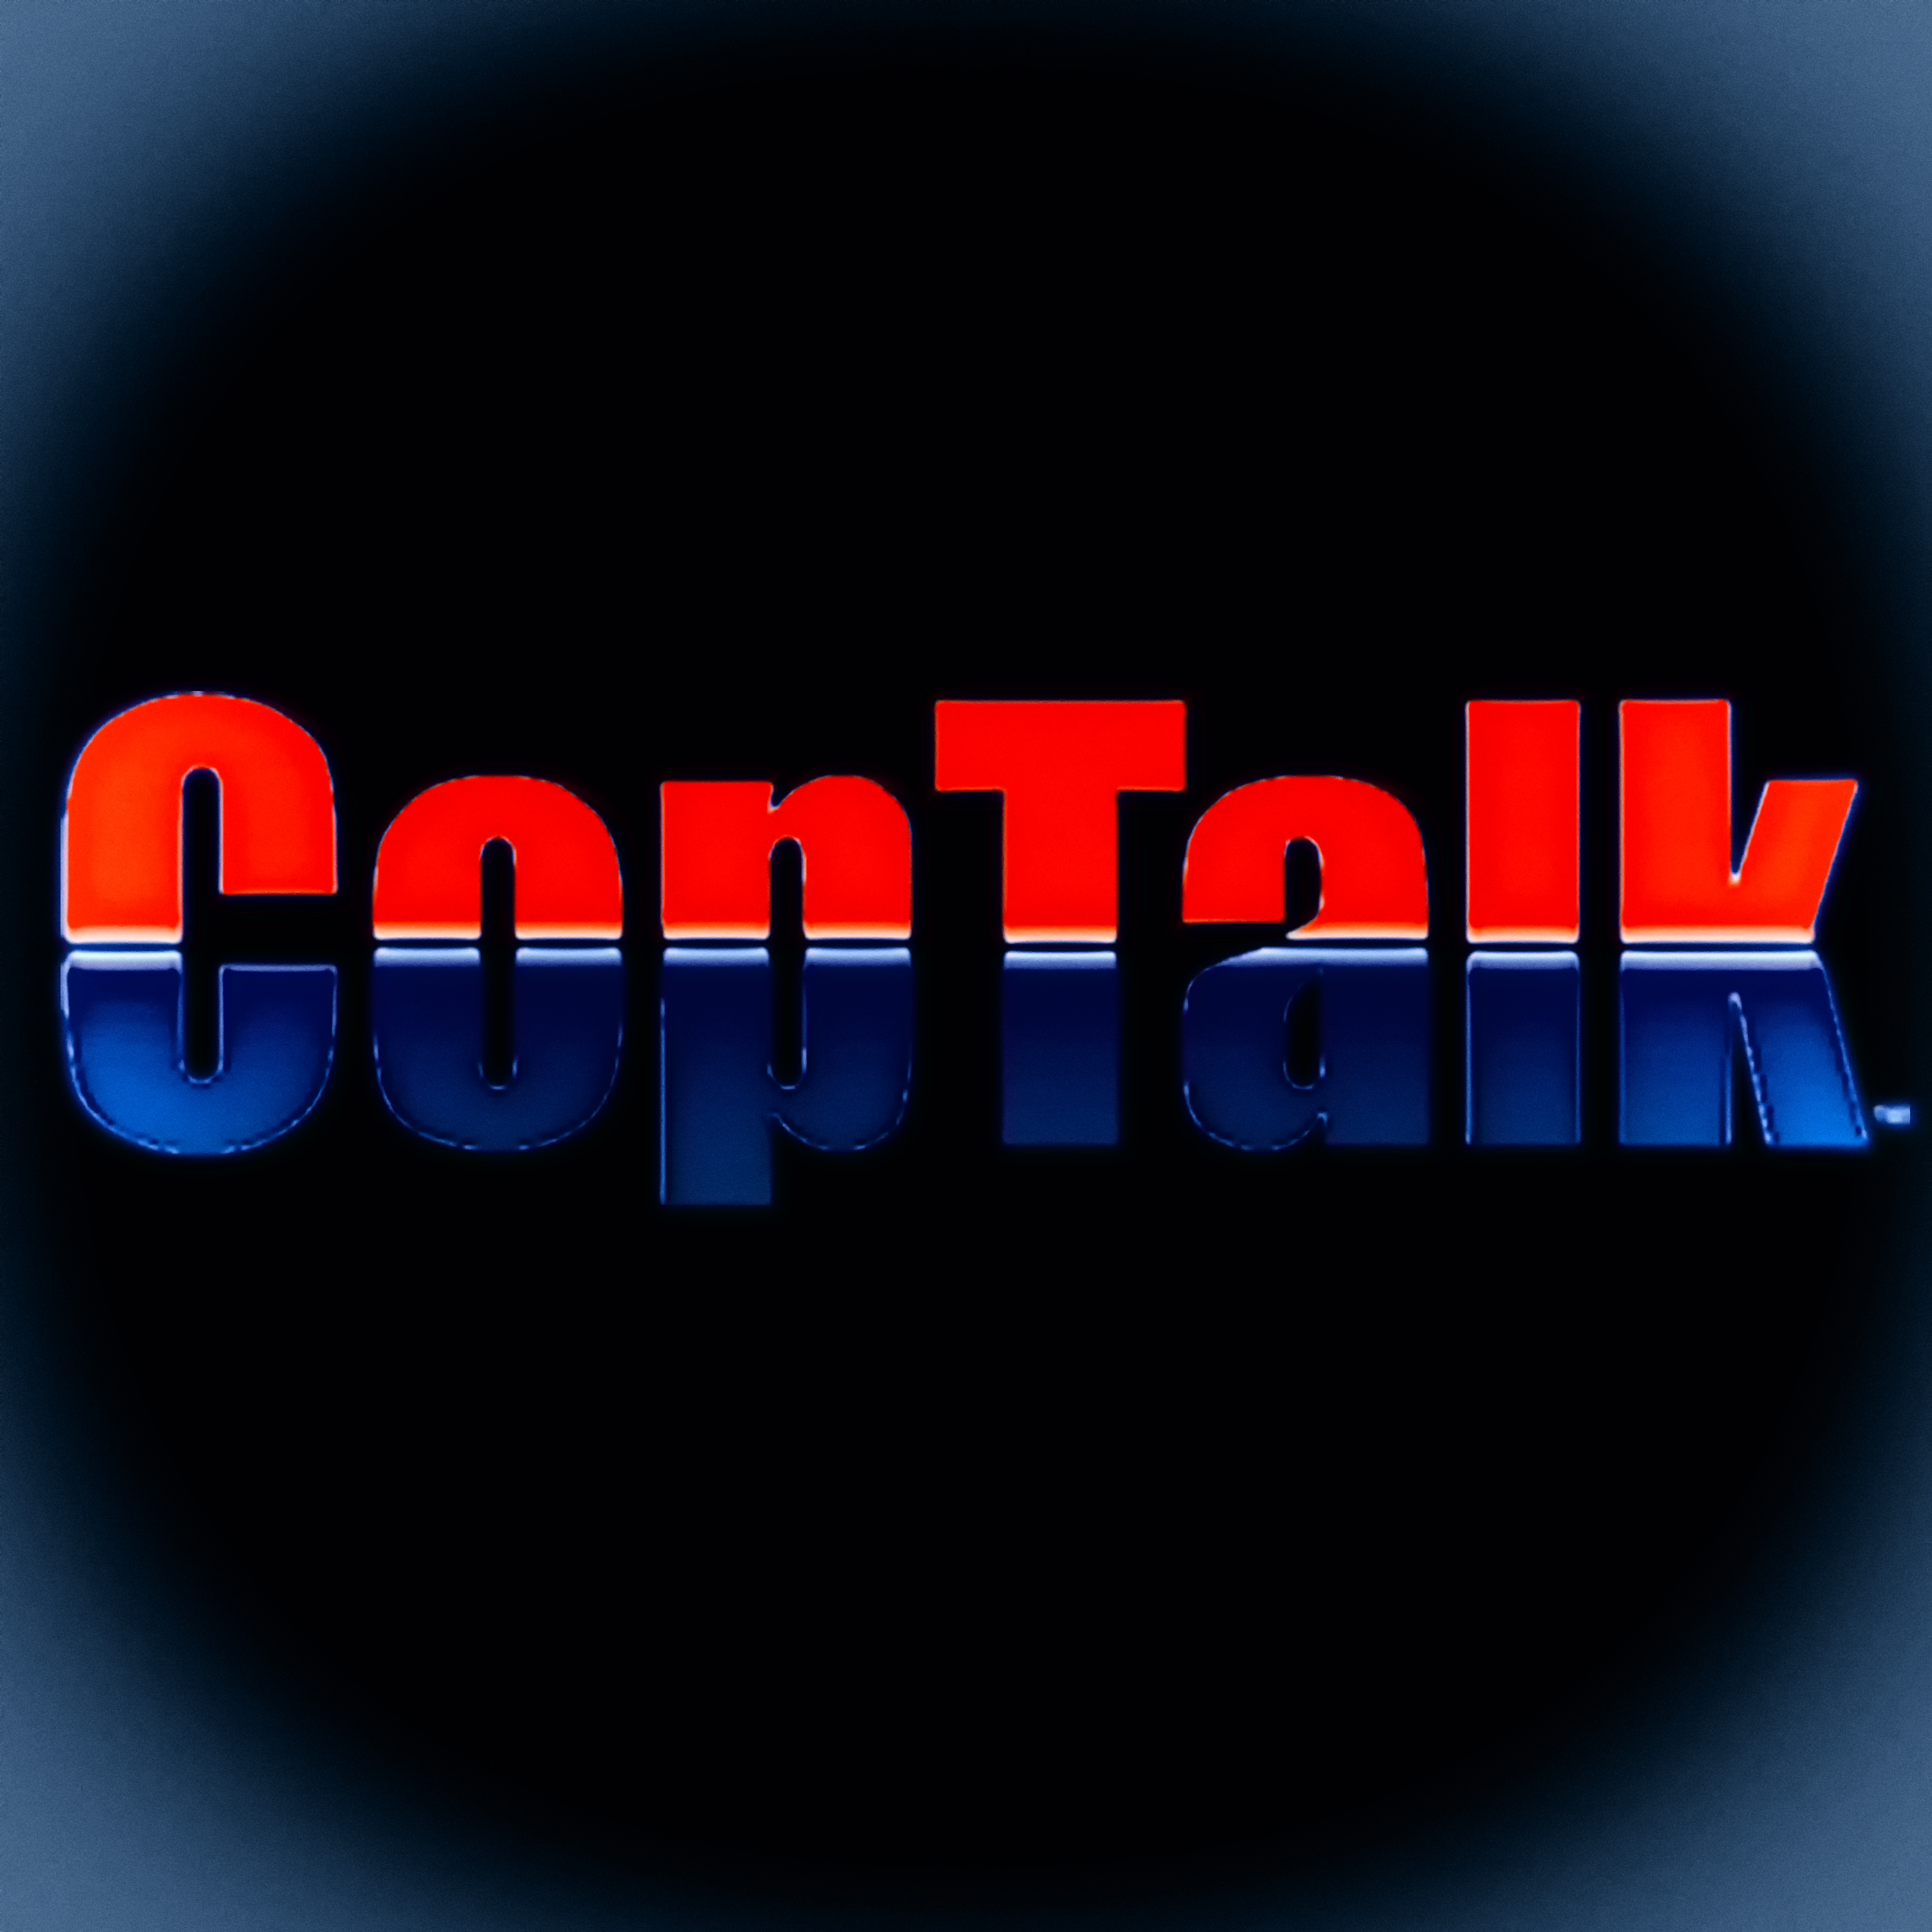 Coptalk.Info – What you do not know will shock you!